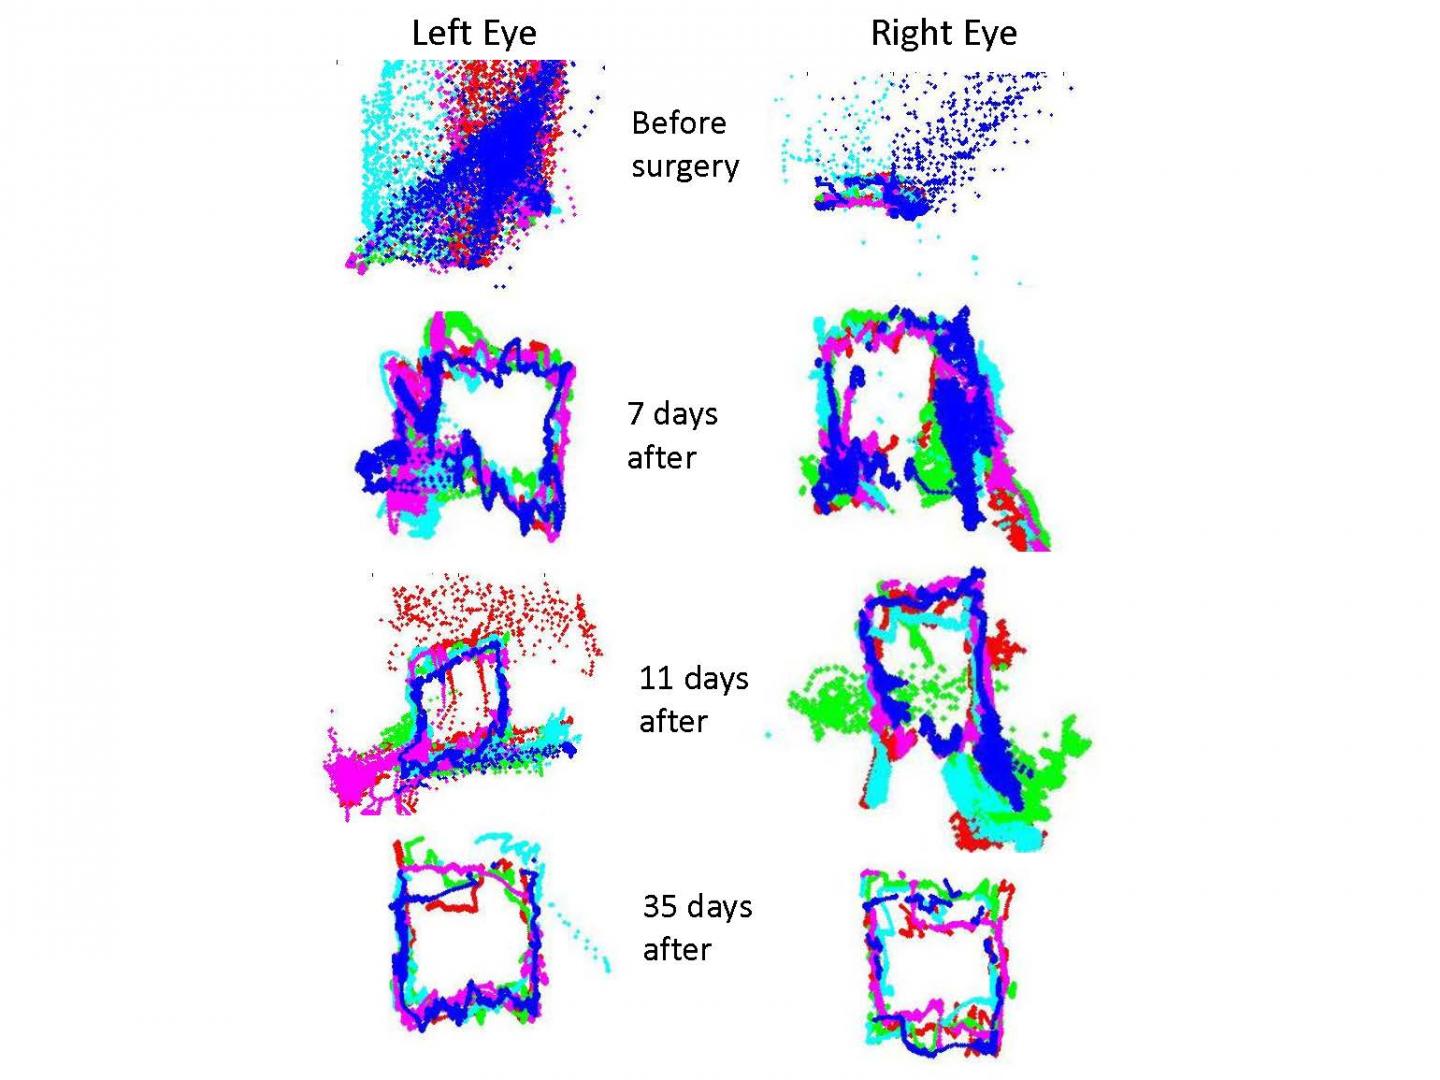 Tracking of Eye Movement to Study Brain Function